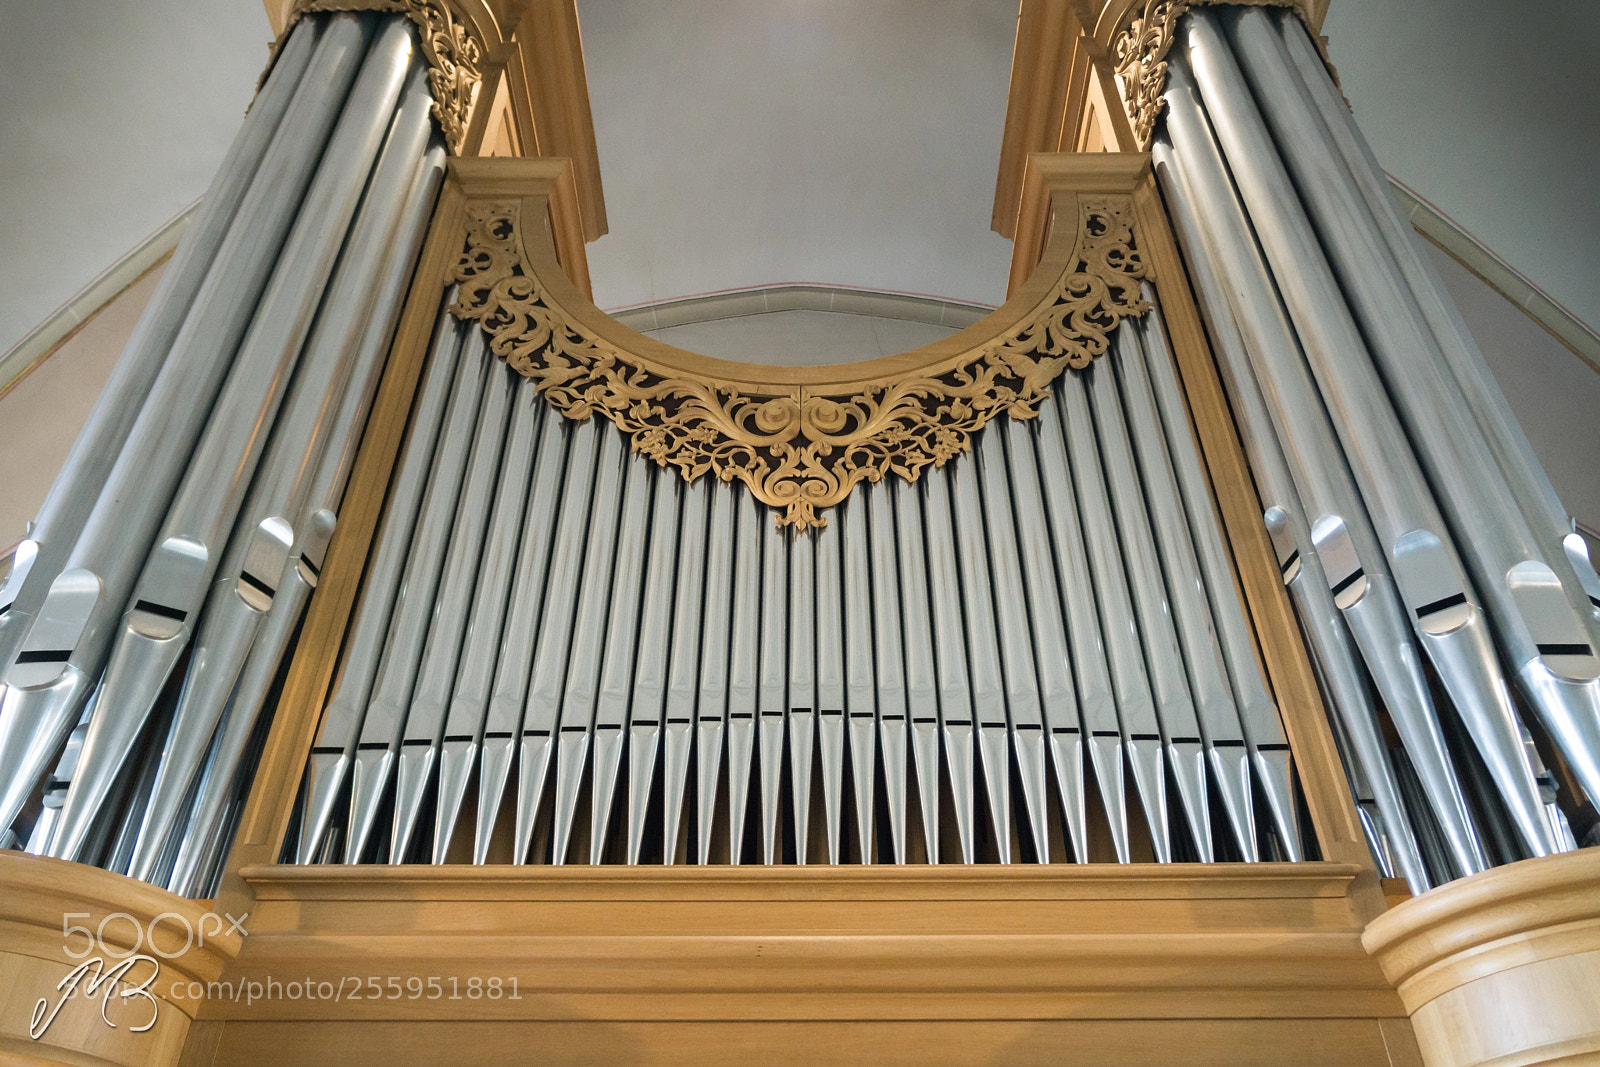 Sony a5100 sample photo. Pipe organ photography